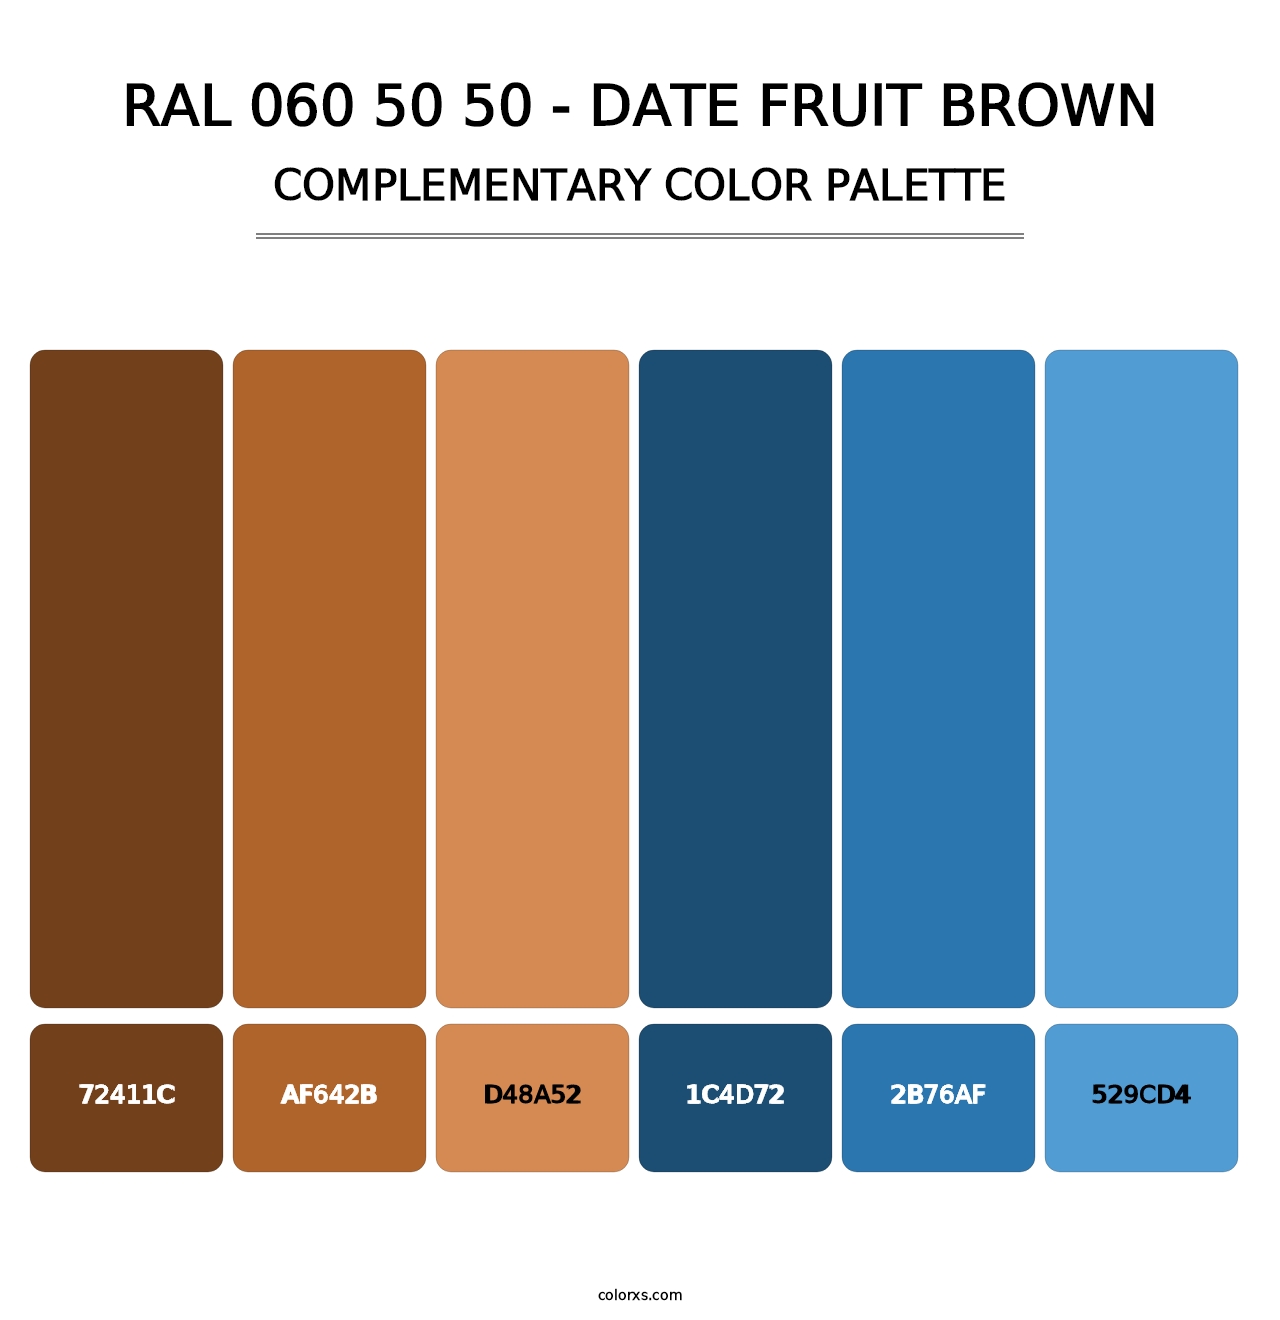 RAL 060 50 50 - Date Fruit Brown - Complementary Color Palette